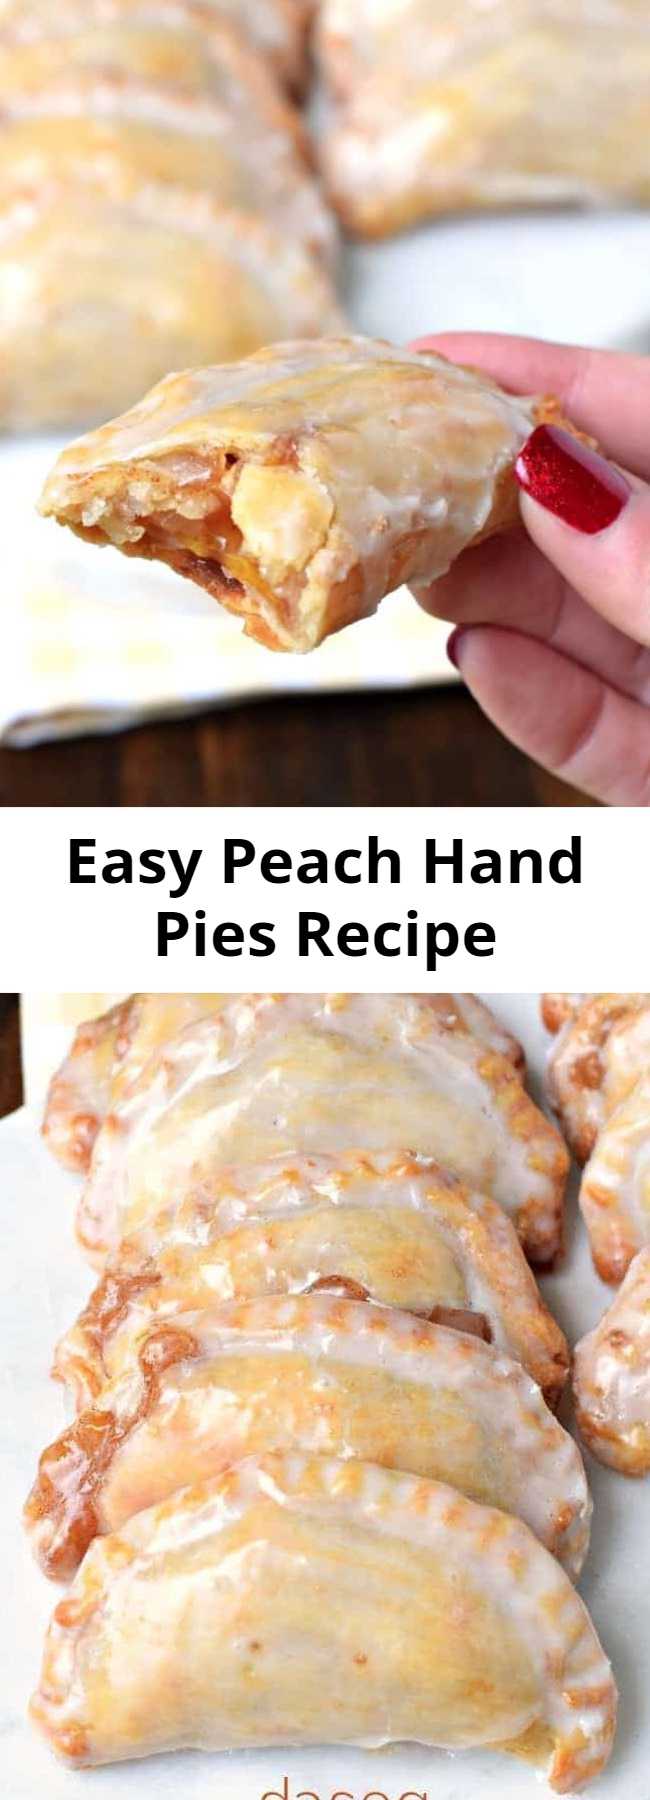 Easy Baked Peach Hand Pies Recipe - Dessert is ready in 30 minutes with these Glazed Peach Hand Pies! The flaky crust and spicy cinnamon filling are the perfect combo in a hand pie, plus they're baked not fried! #handpies #piefilling #peach #dessert